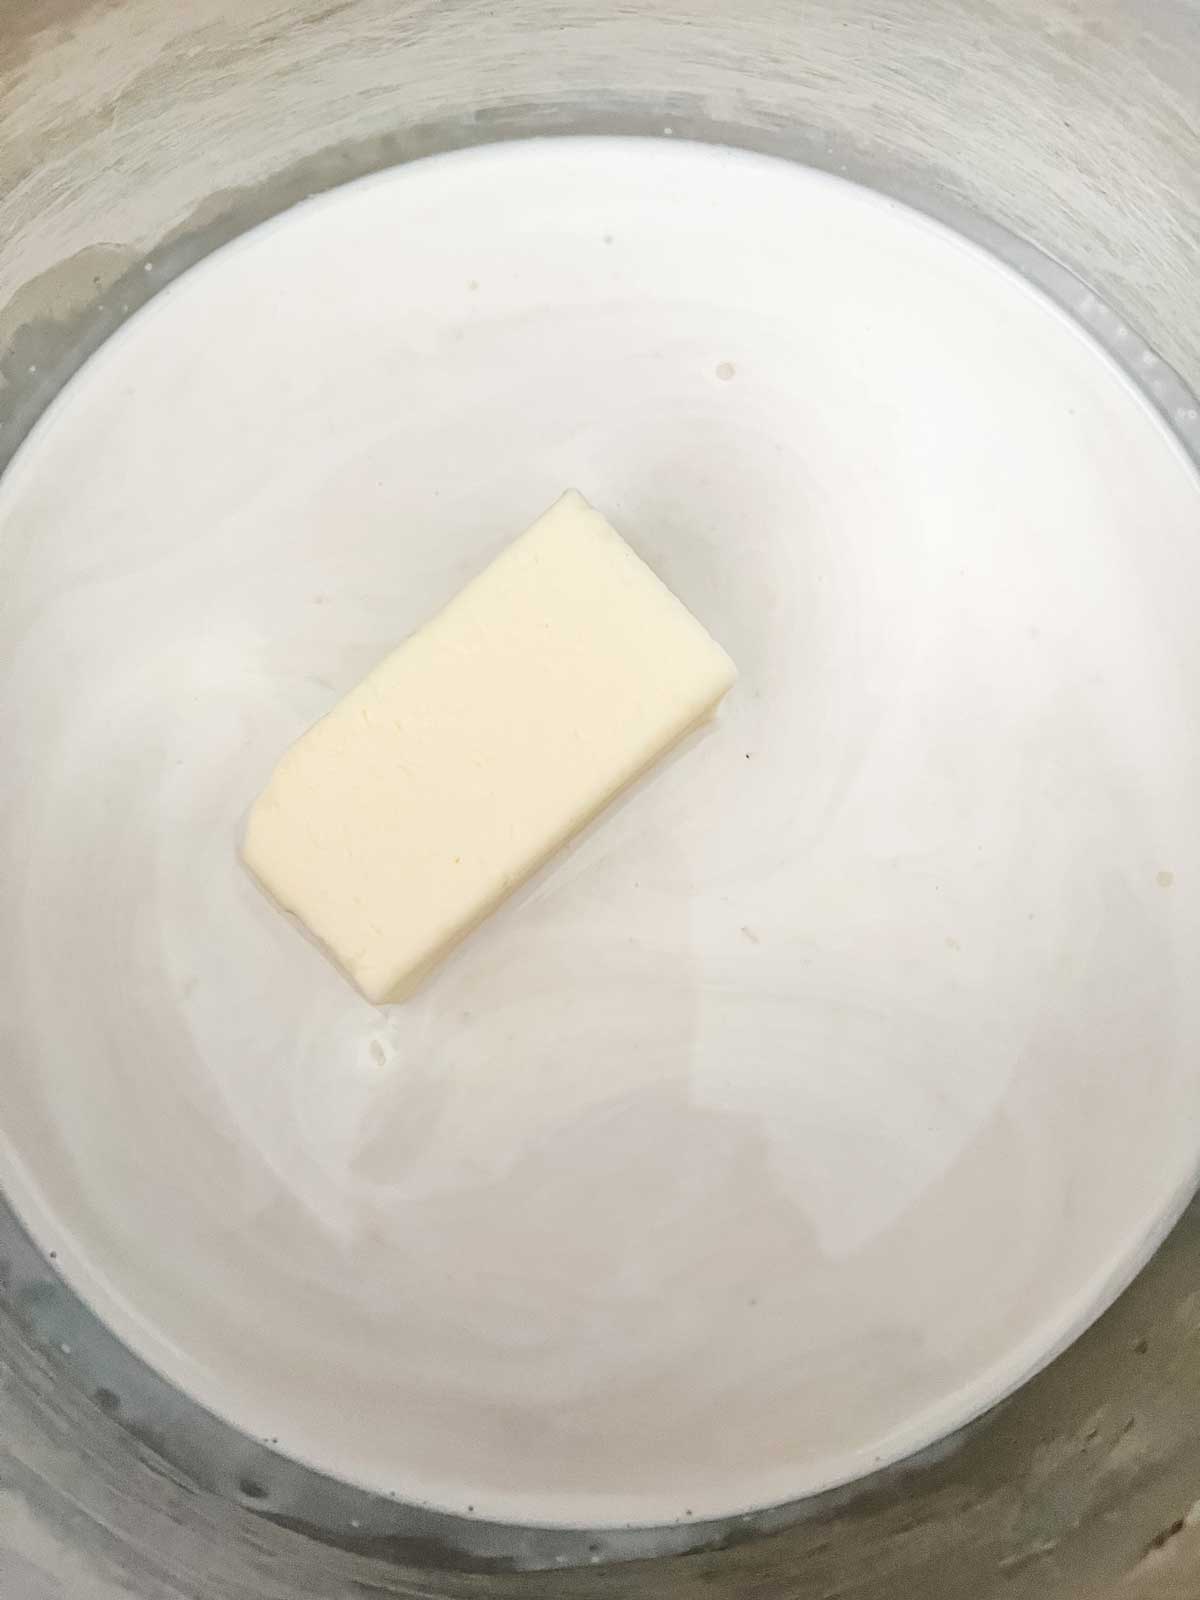 Photo of cream and butter in a saucepan.